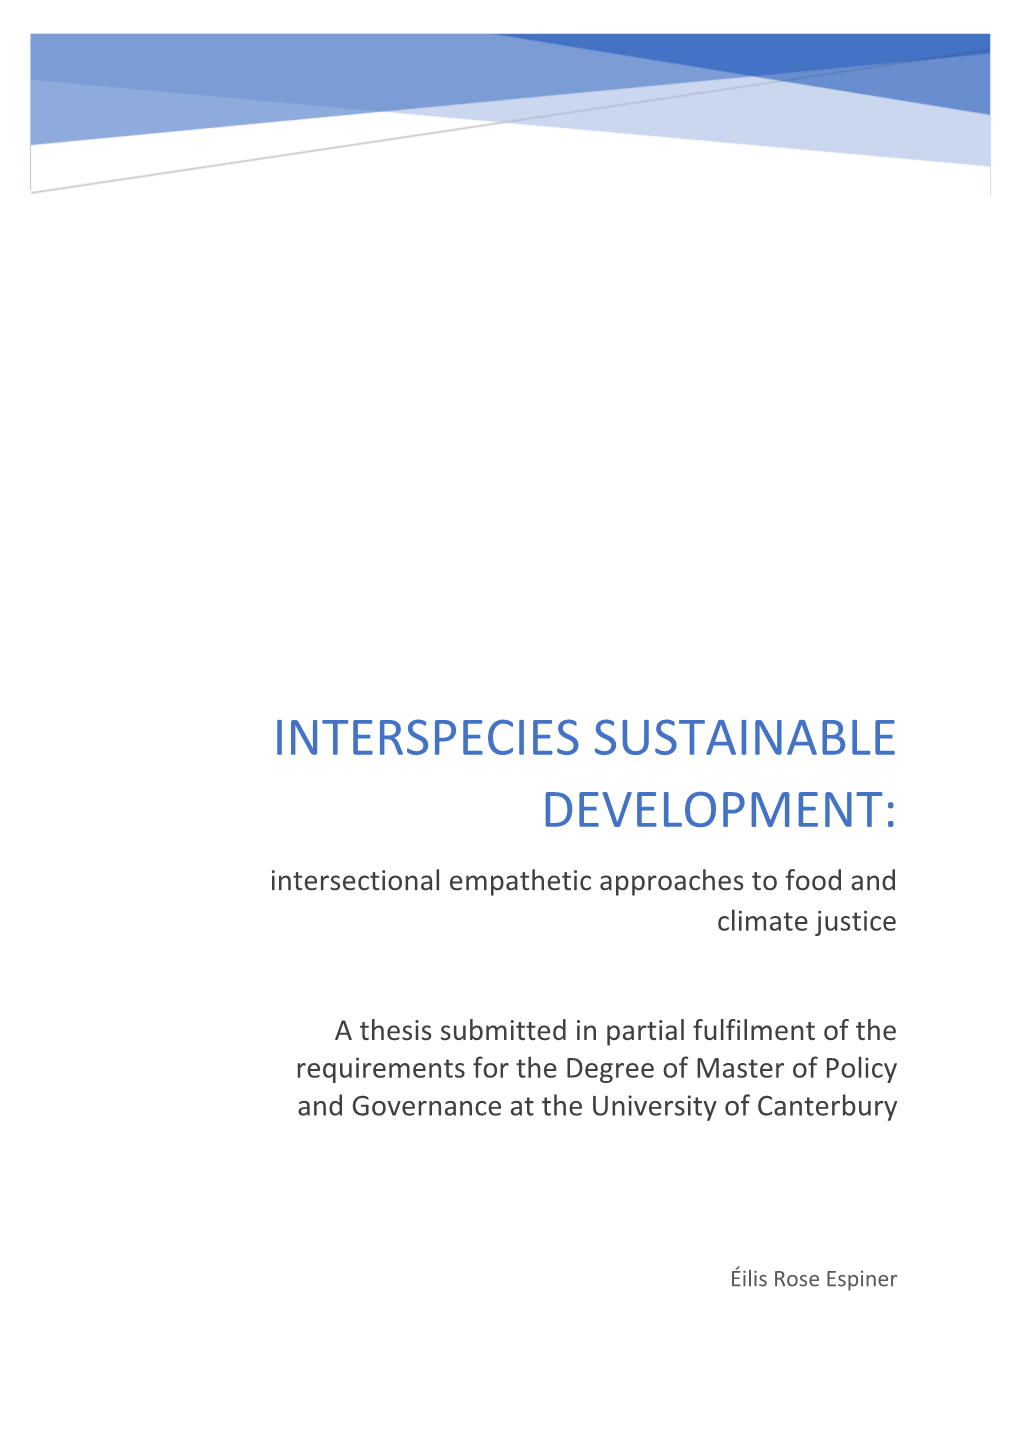 INTERSPECIES SUSTAINABLE DEVELOPMENT: Intersectional Empathetic Approaches to Food and Climate Justice